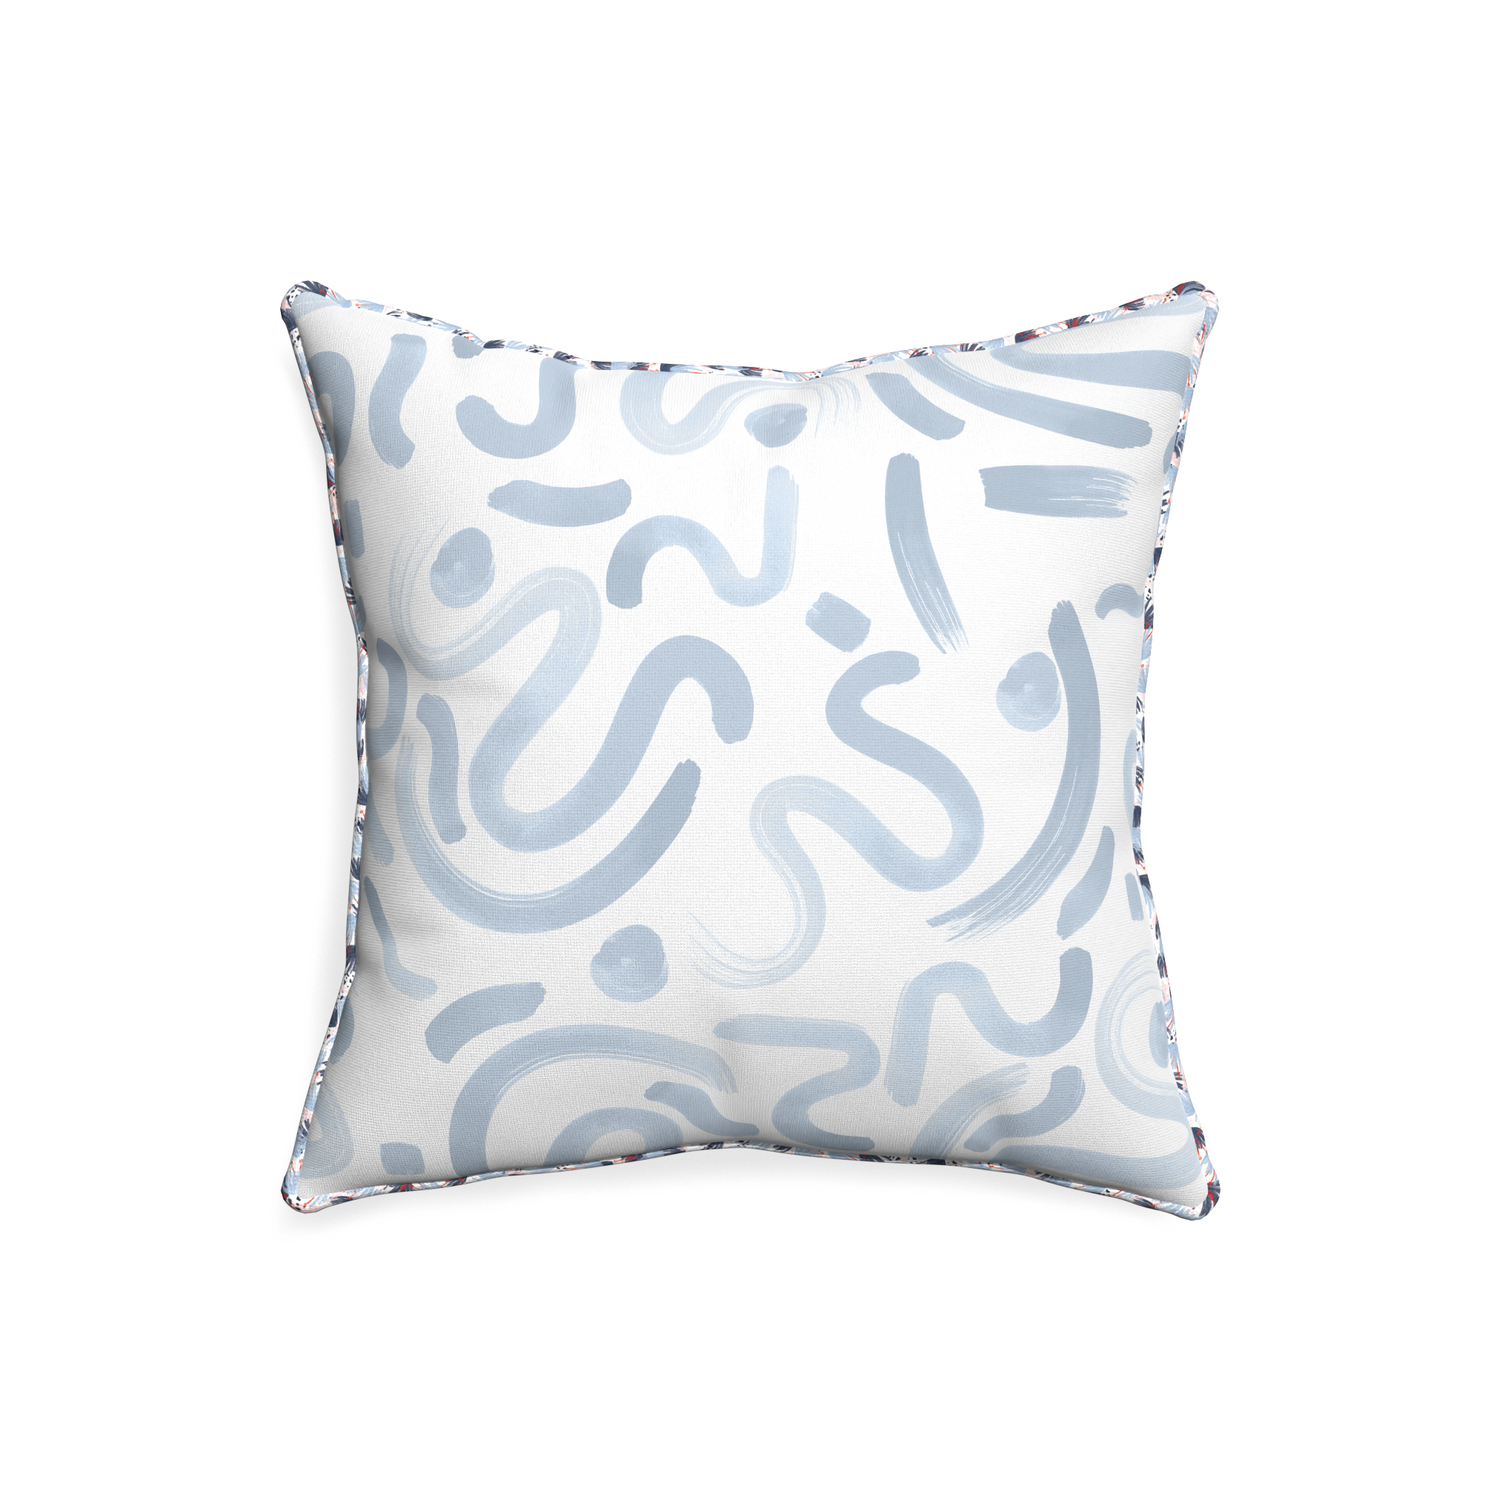 20-square hockney sky custom pillow with e piping on white background